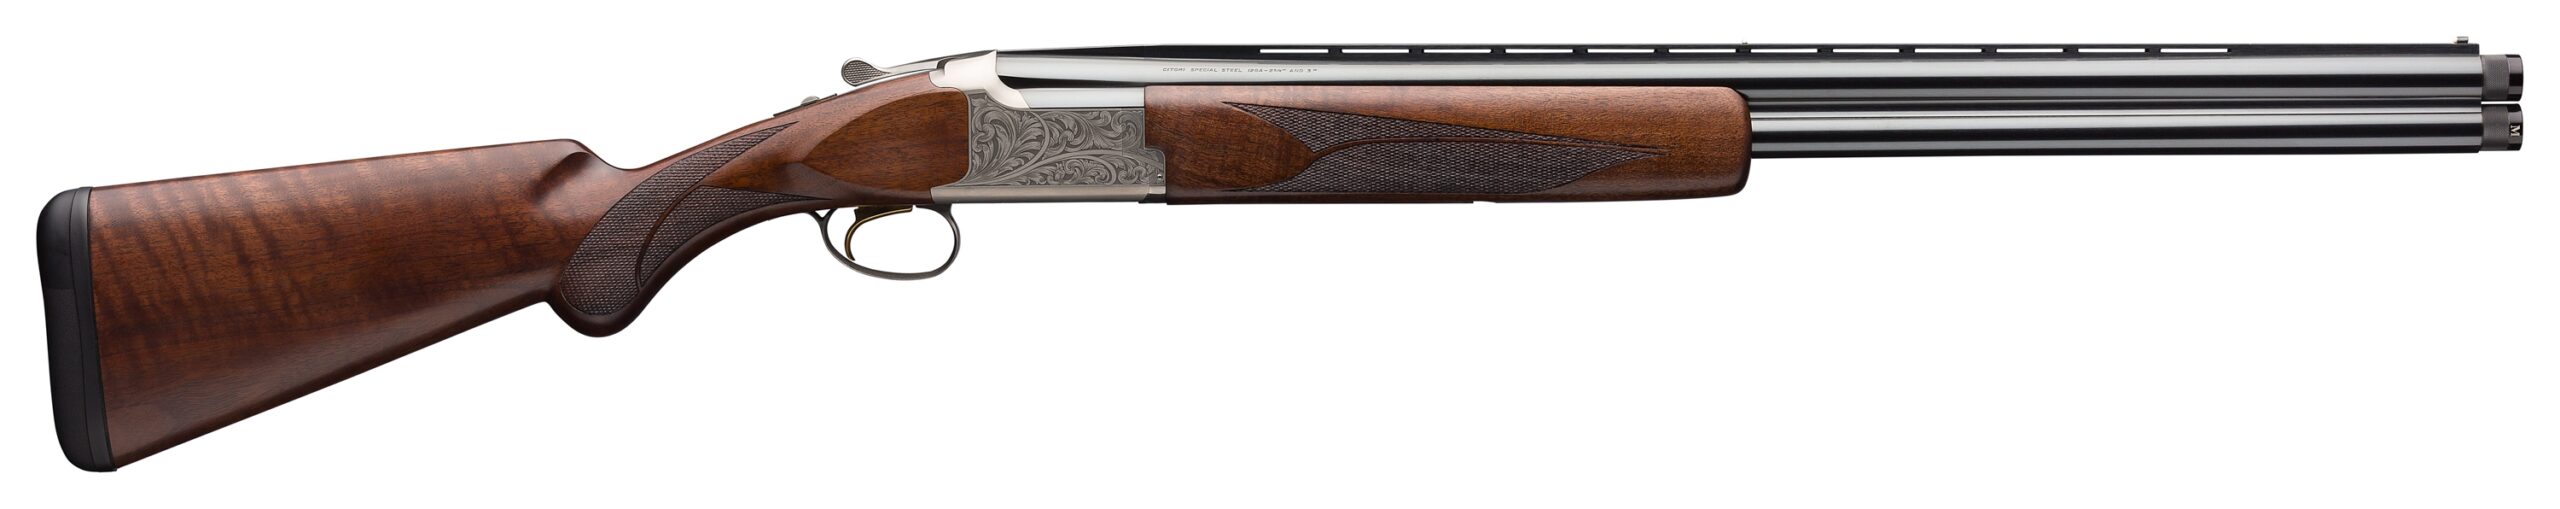 wood-stocked Browning Citori over/under shotgun with rib and metal receiver